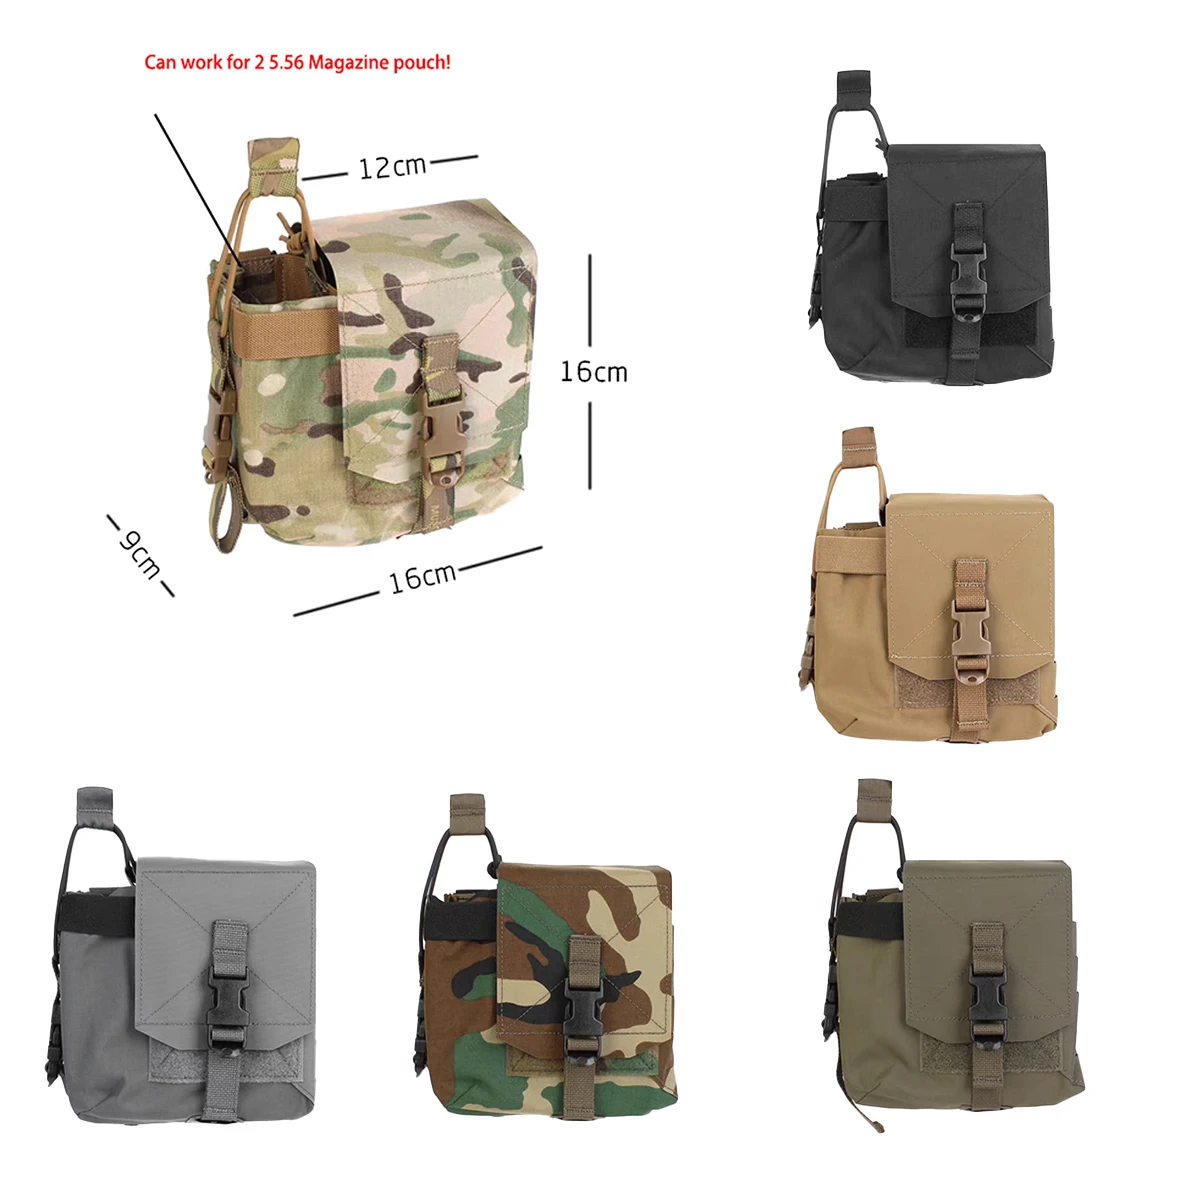 

Sports Vest SS "Variant" Multipurpose Molle Pouch Sundries Bag Interphone Radio Pouch Smoke Bag PH68